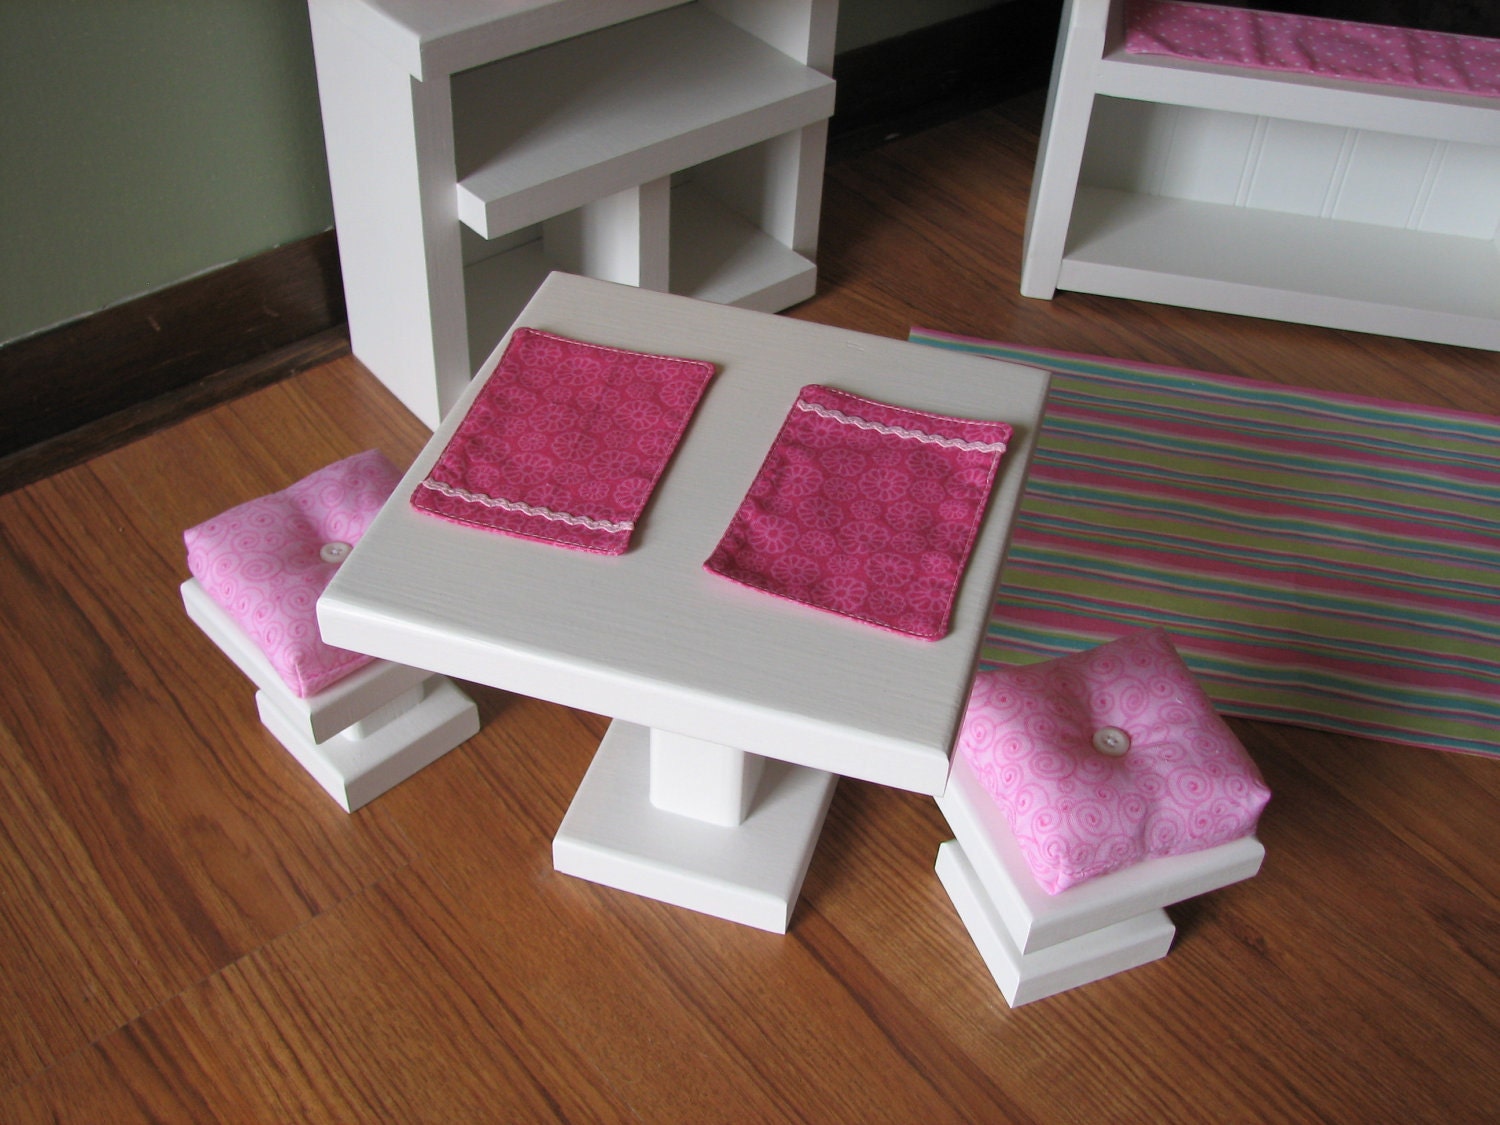 Cafe Side Table with Cushioned Bar Stools and Placemats - Sweet Shop Cafe / Bakery Set for American Girl or other similar 18" dolls